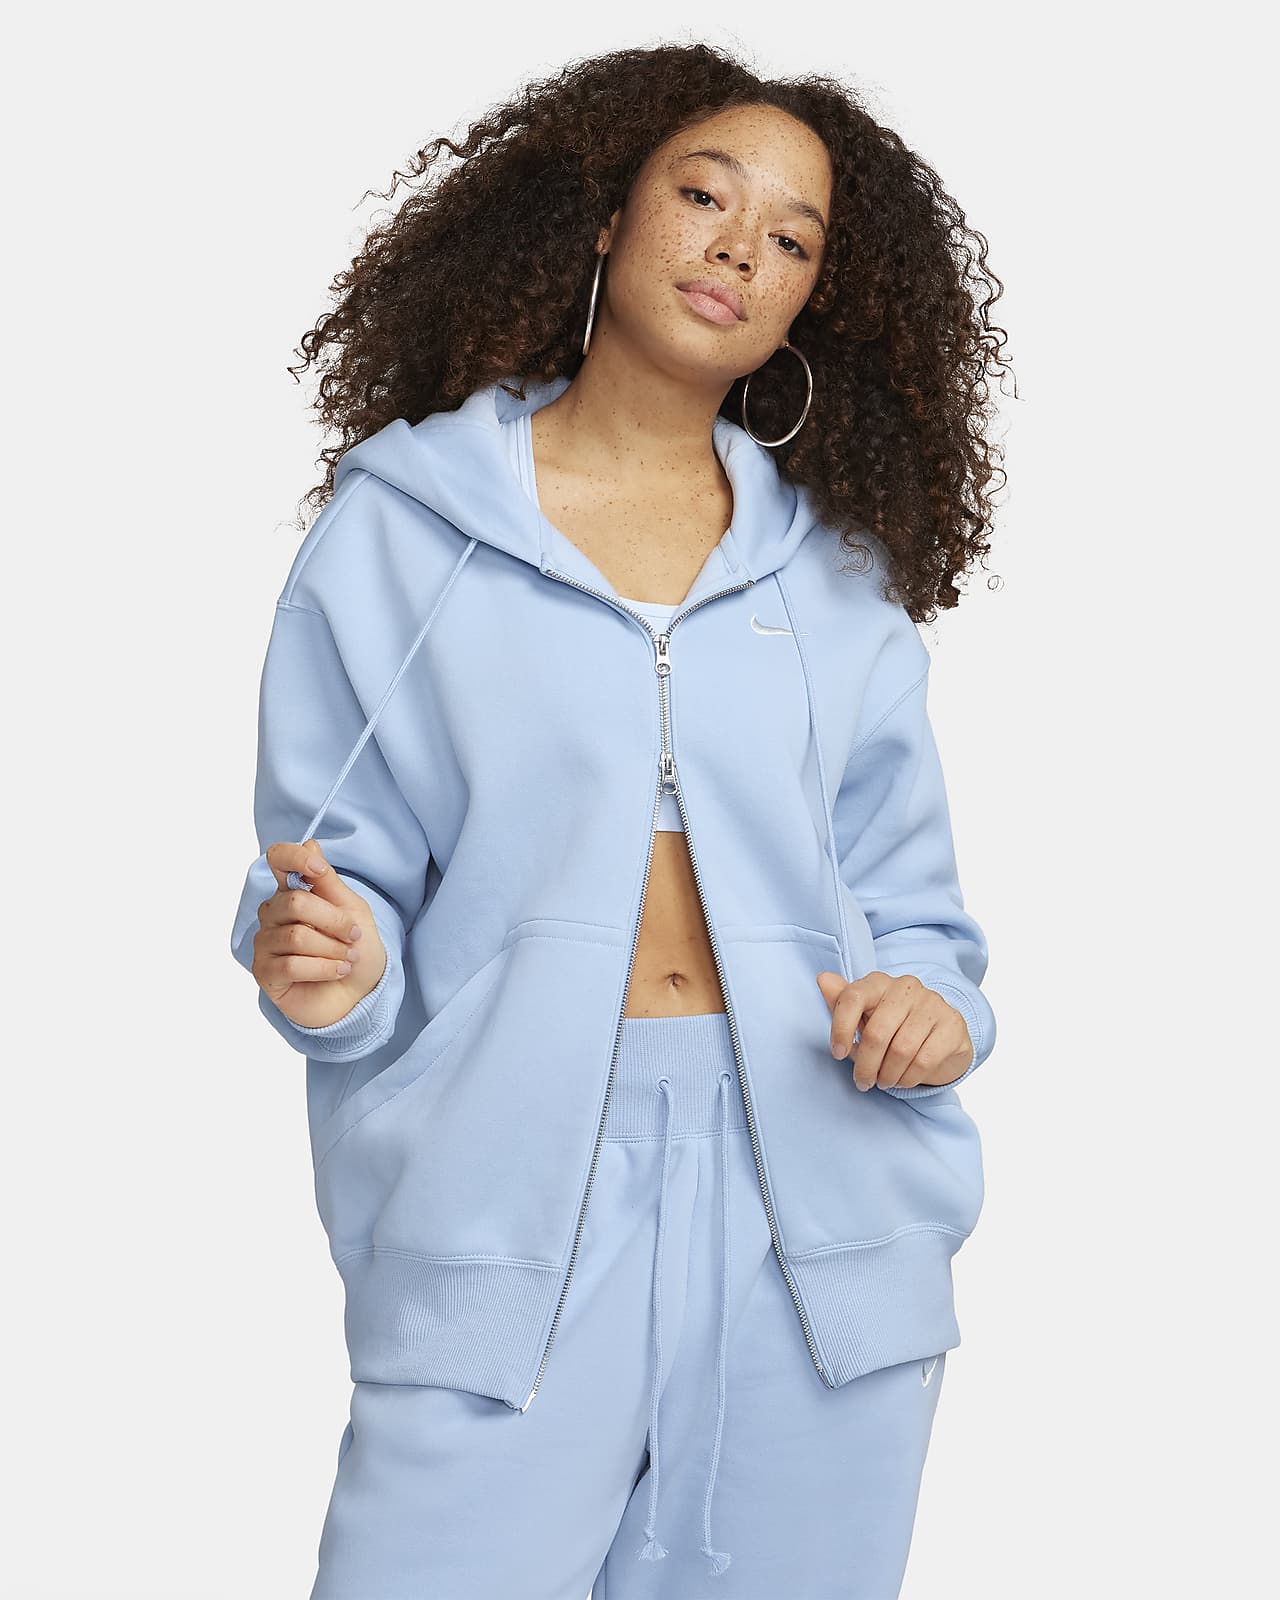 https://static.nike.com/a/images/t_PDP_1280_v1/f_auto,q_auto:eco/fa60226e-a90e-486f-85d6-f86e9a6b795a/sportswear-phoenix-fleece-womens-oversized-full-zip-hoodie-kN1SrB.png